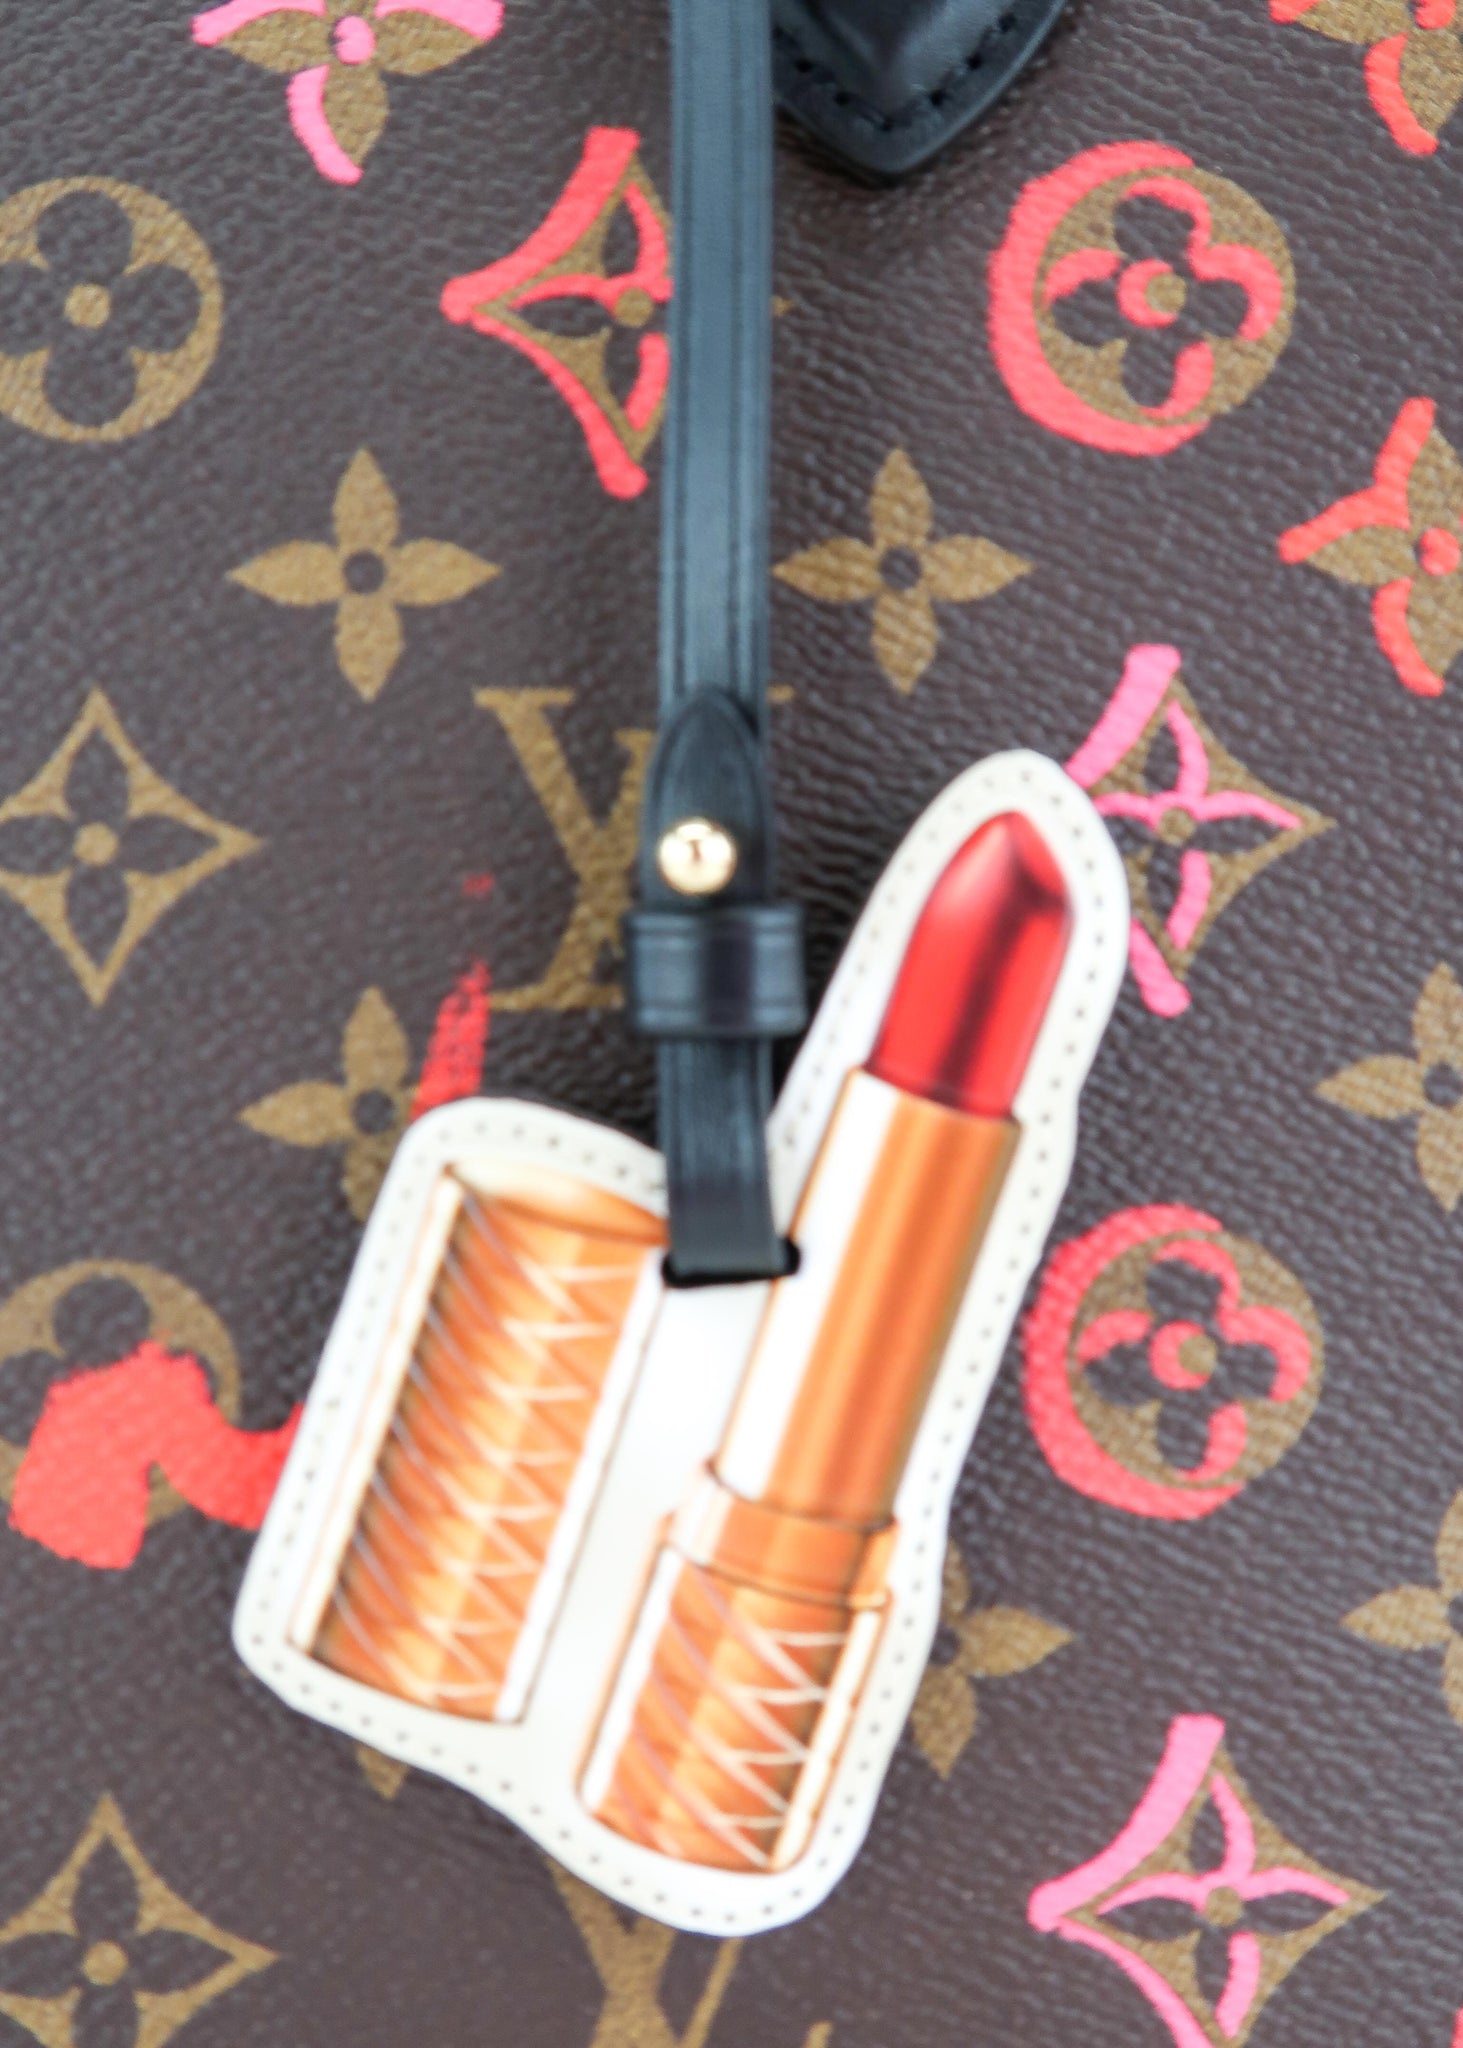 In LVoe with Louis Vuitton: Morning Mon Monogram